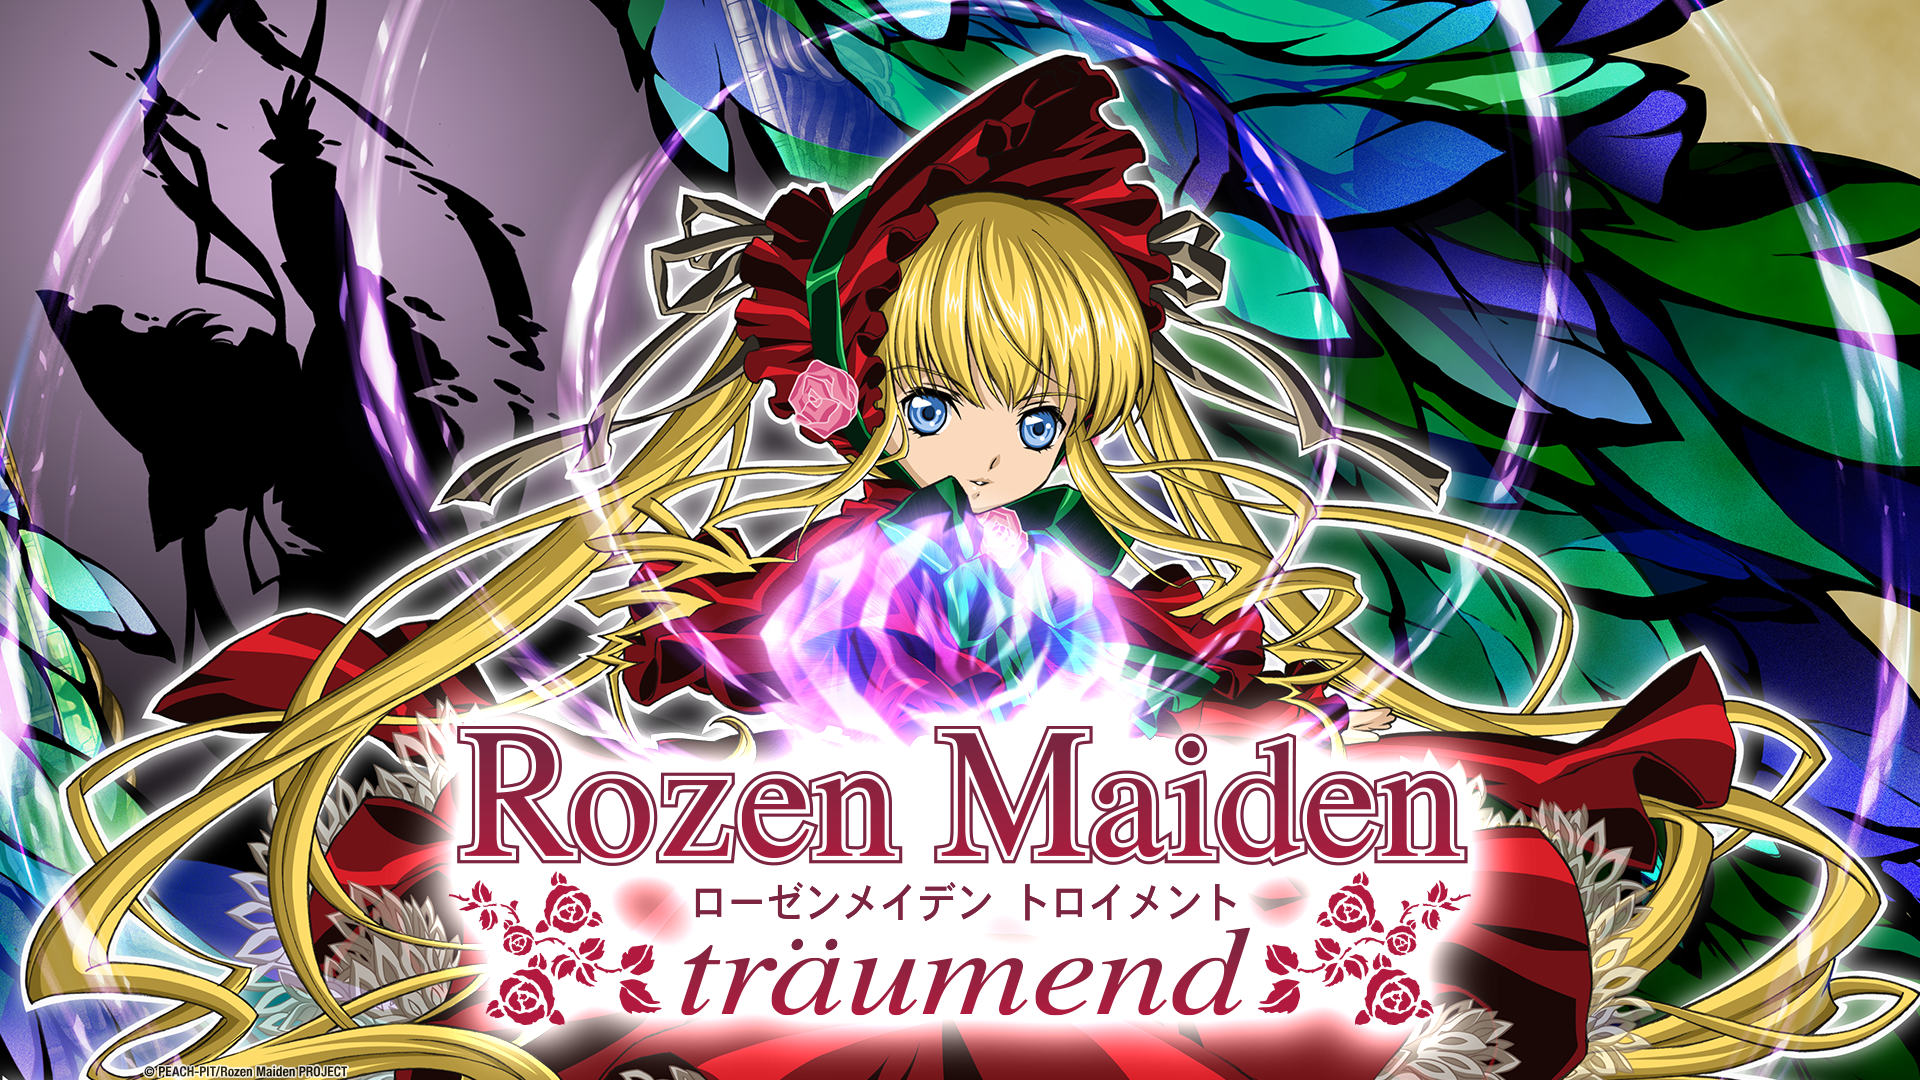 Key art and logo for Rozen Maiden: Traumend